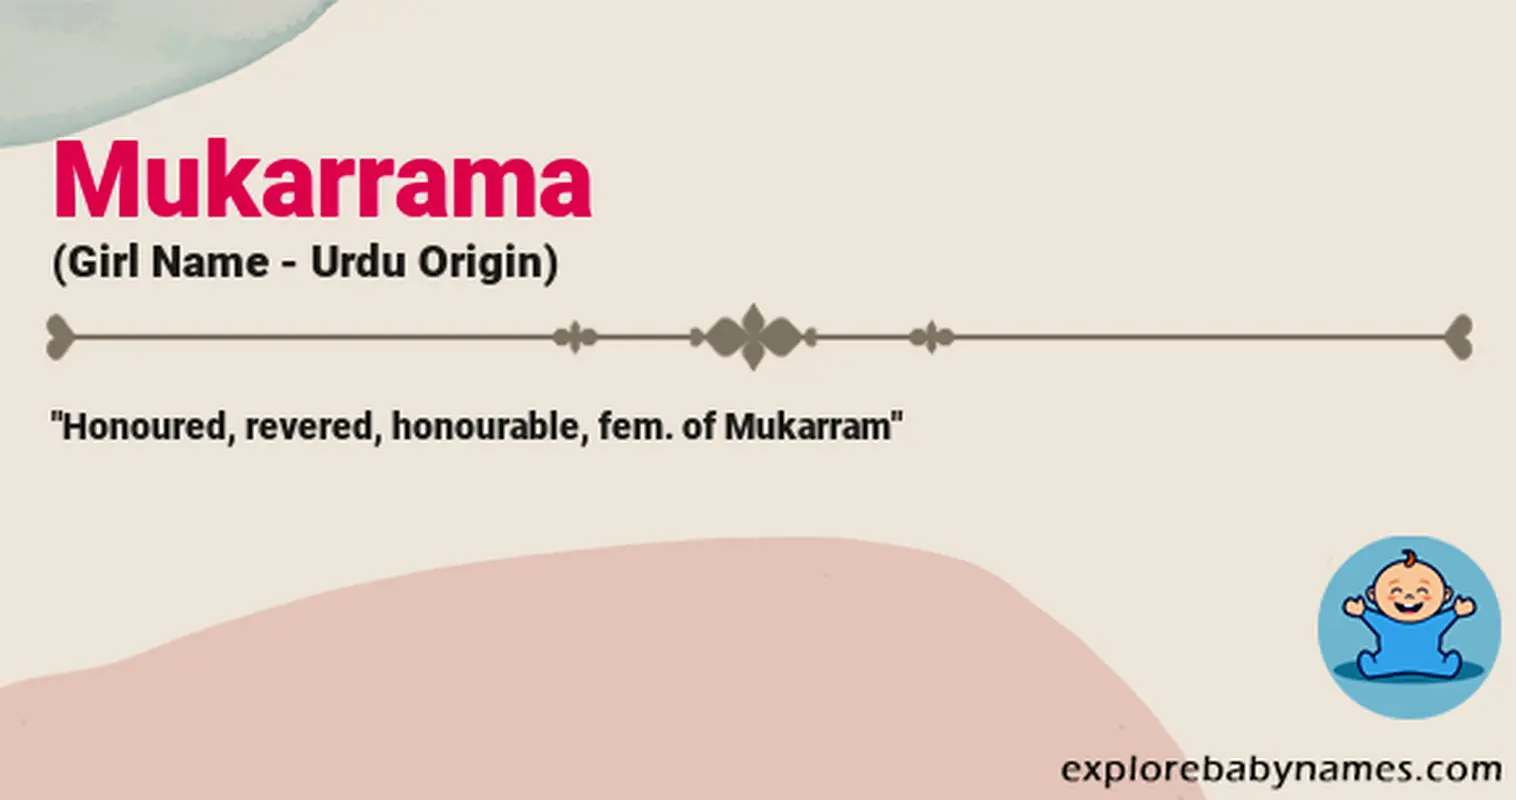 Meaning of Mukarrama